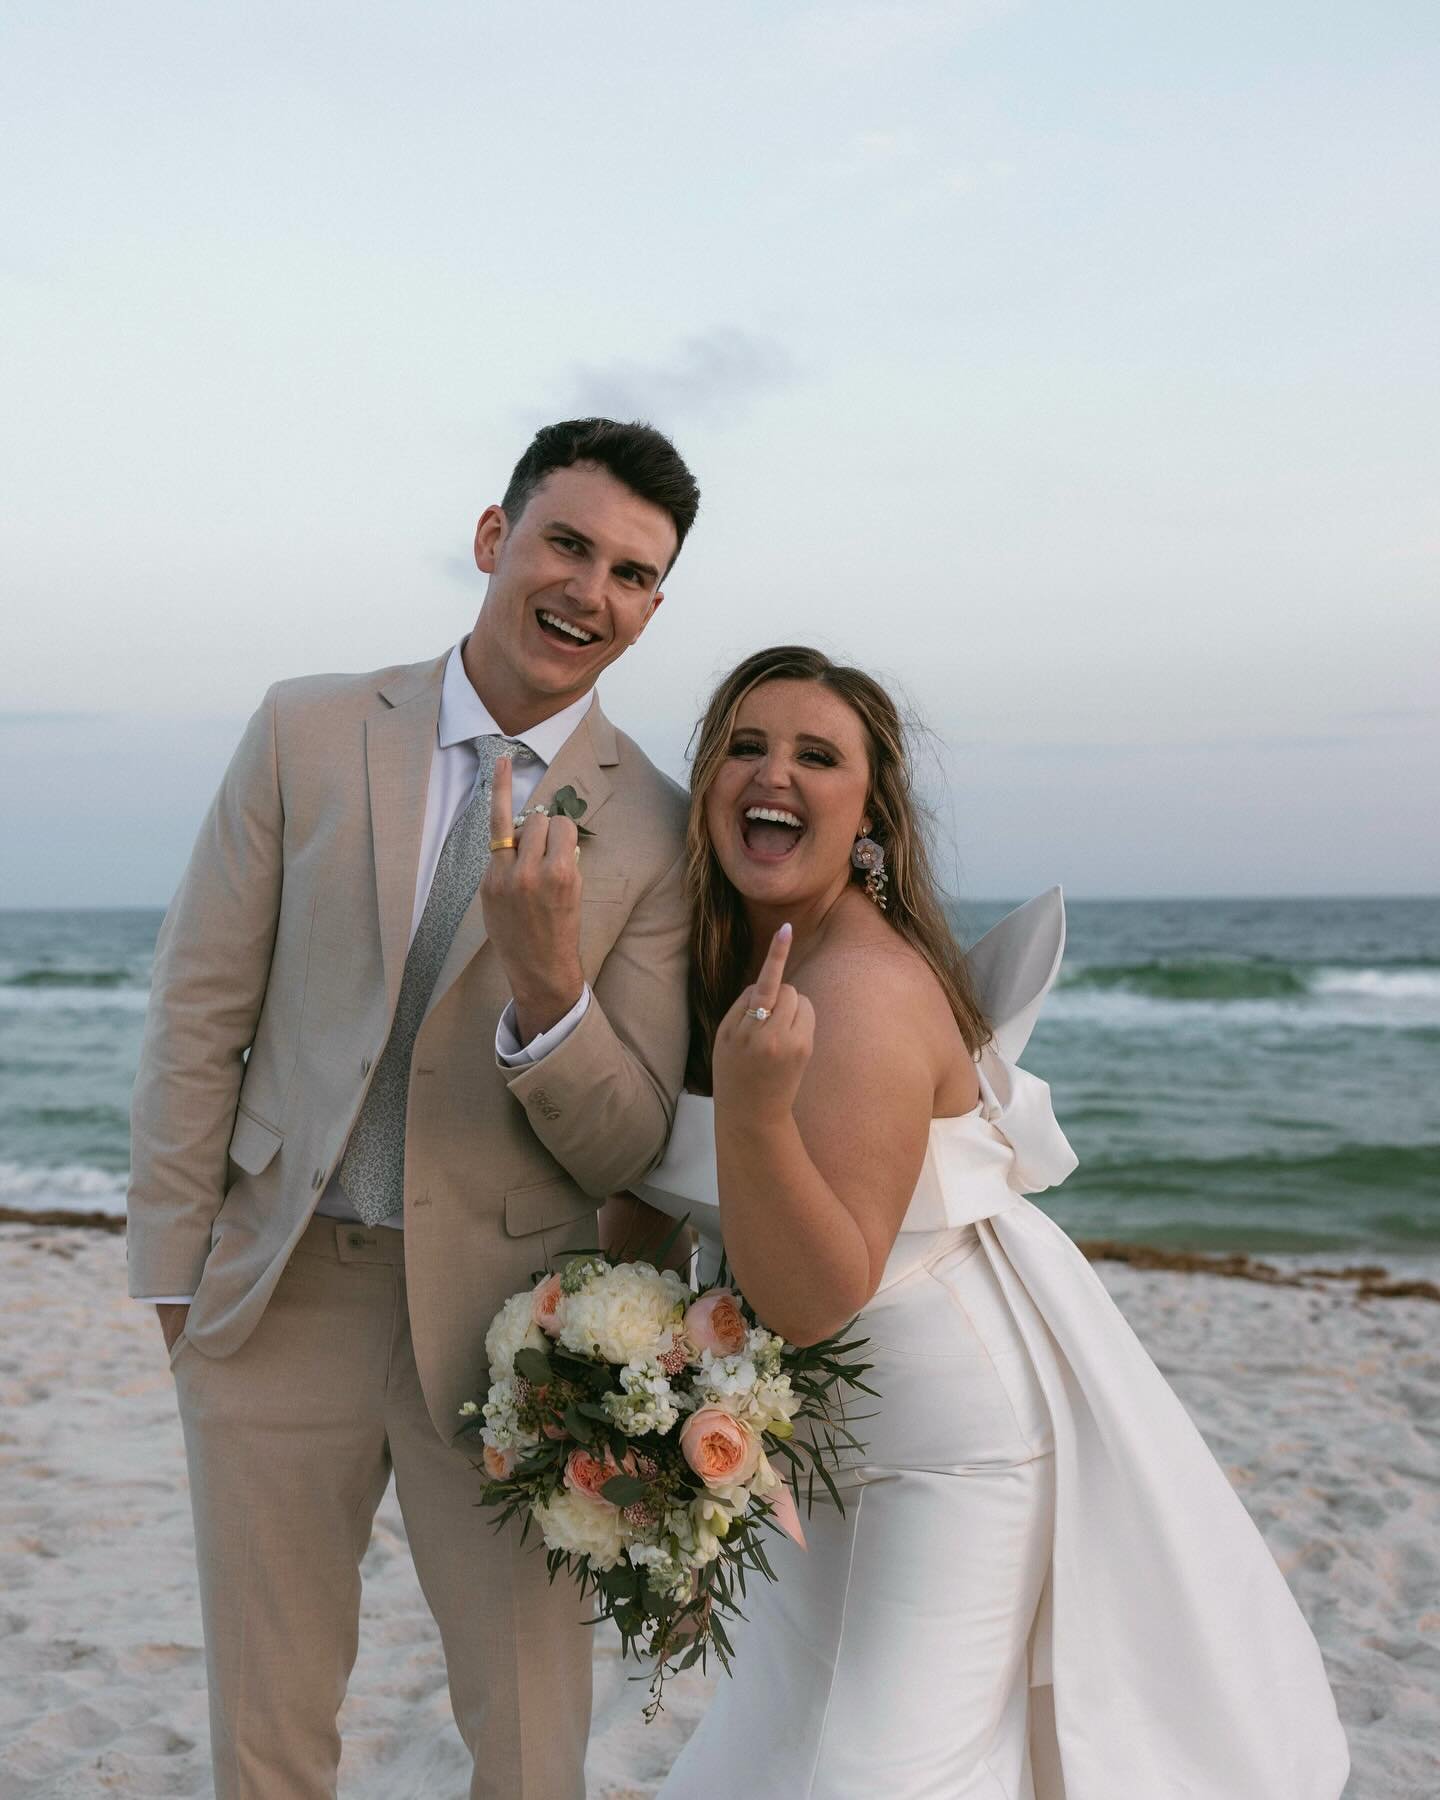 Love is in the air!!!! 💙💙 We officially hosted our first beach wedding at Sea Bliss &mdash; the weather was perfection, the beach was calm, and the bride &amp; groom were stunning. We hope you guys enjoy your marriage as much as we do ours. Wishing